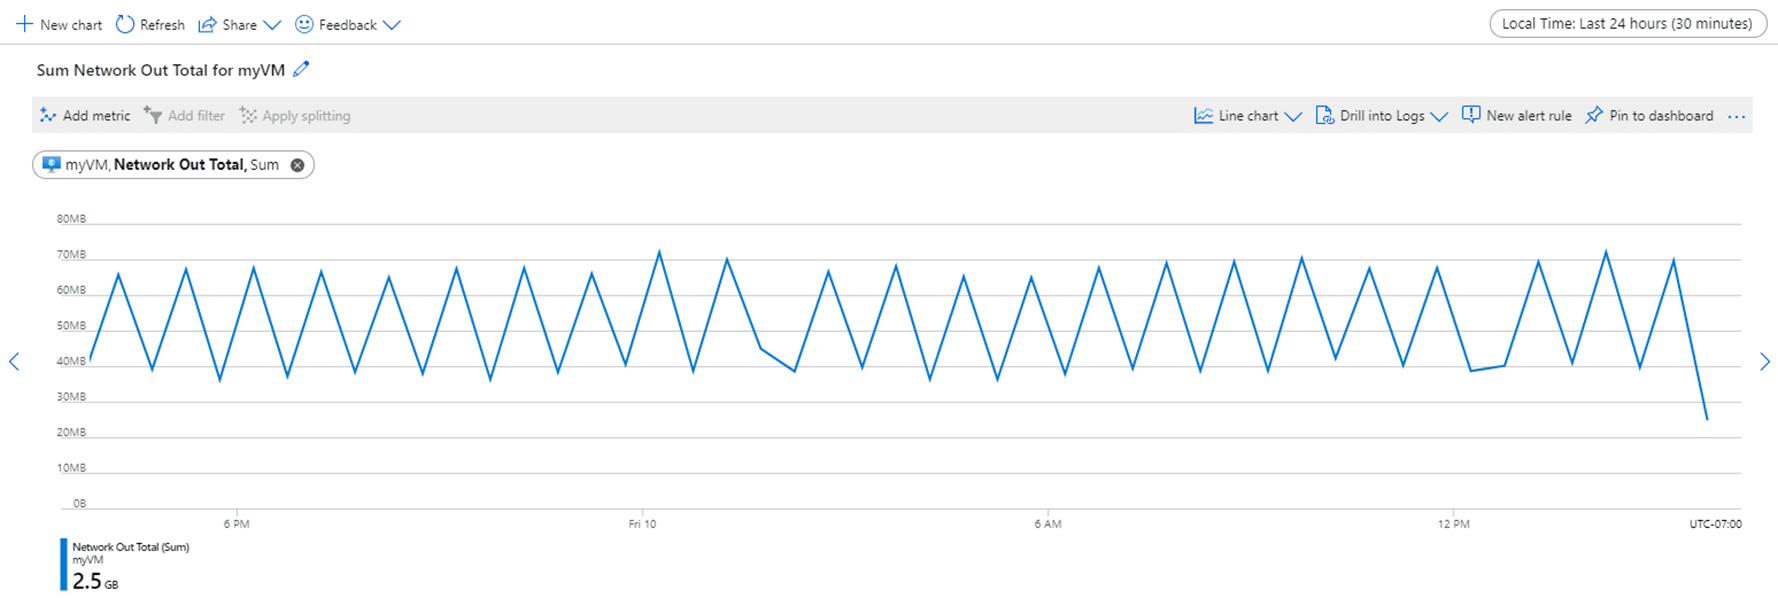 Screenshot showing data on a line graph set to 24-hour time range and 30-minute time granularity